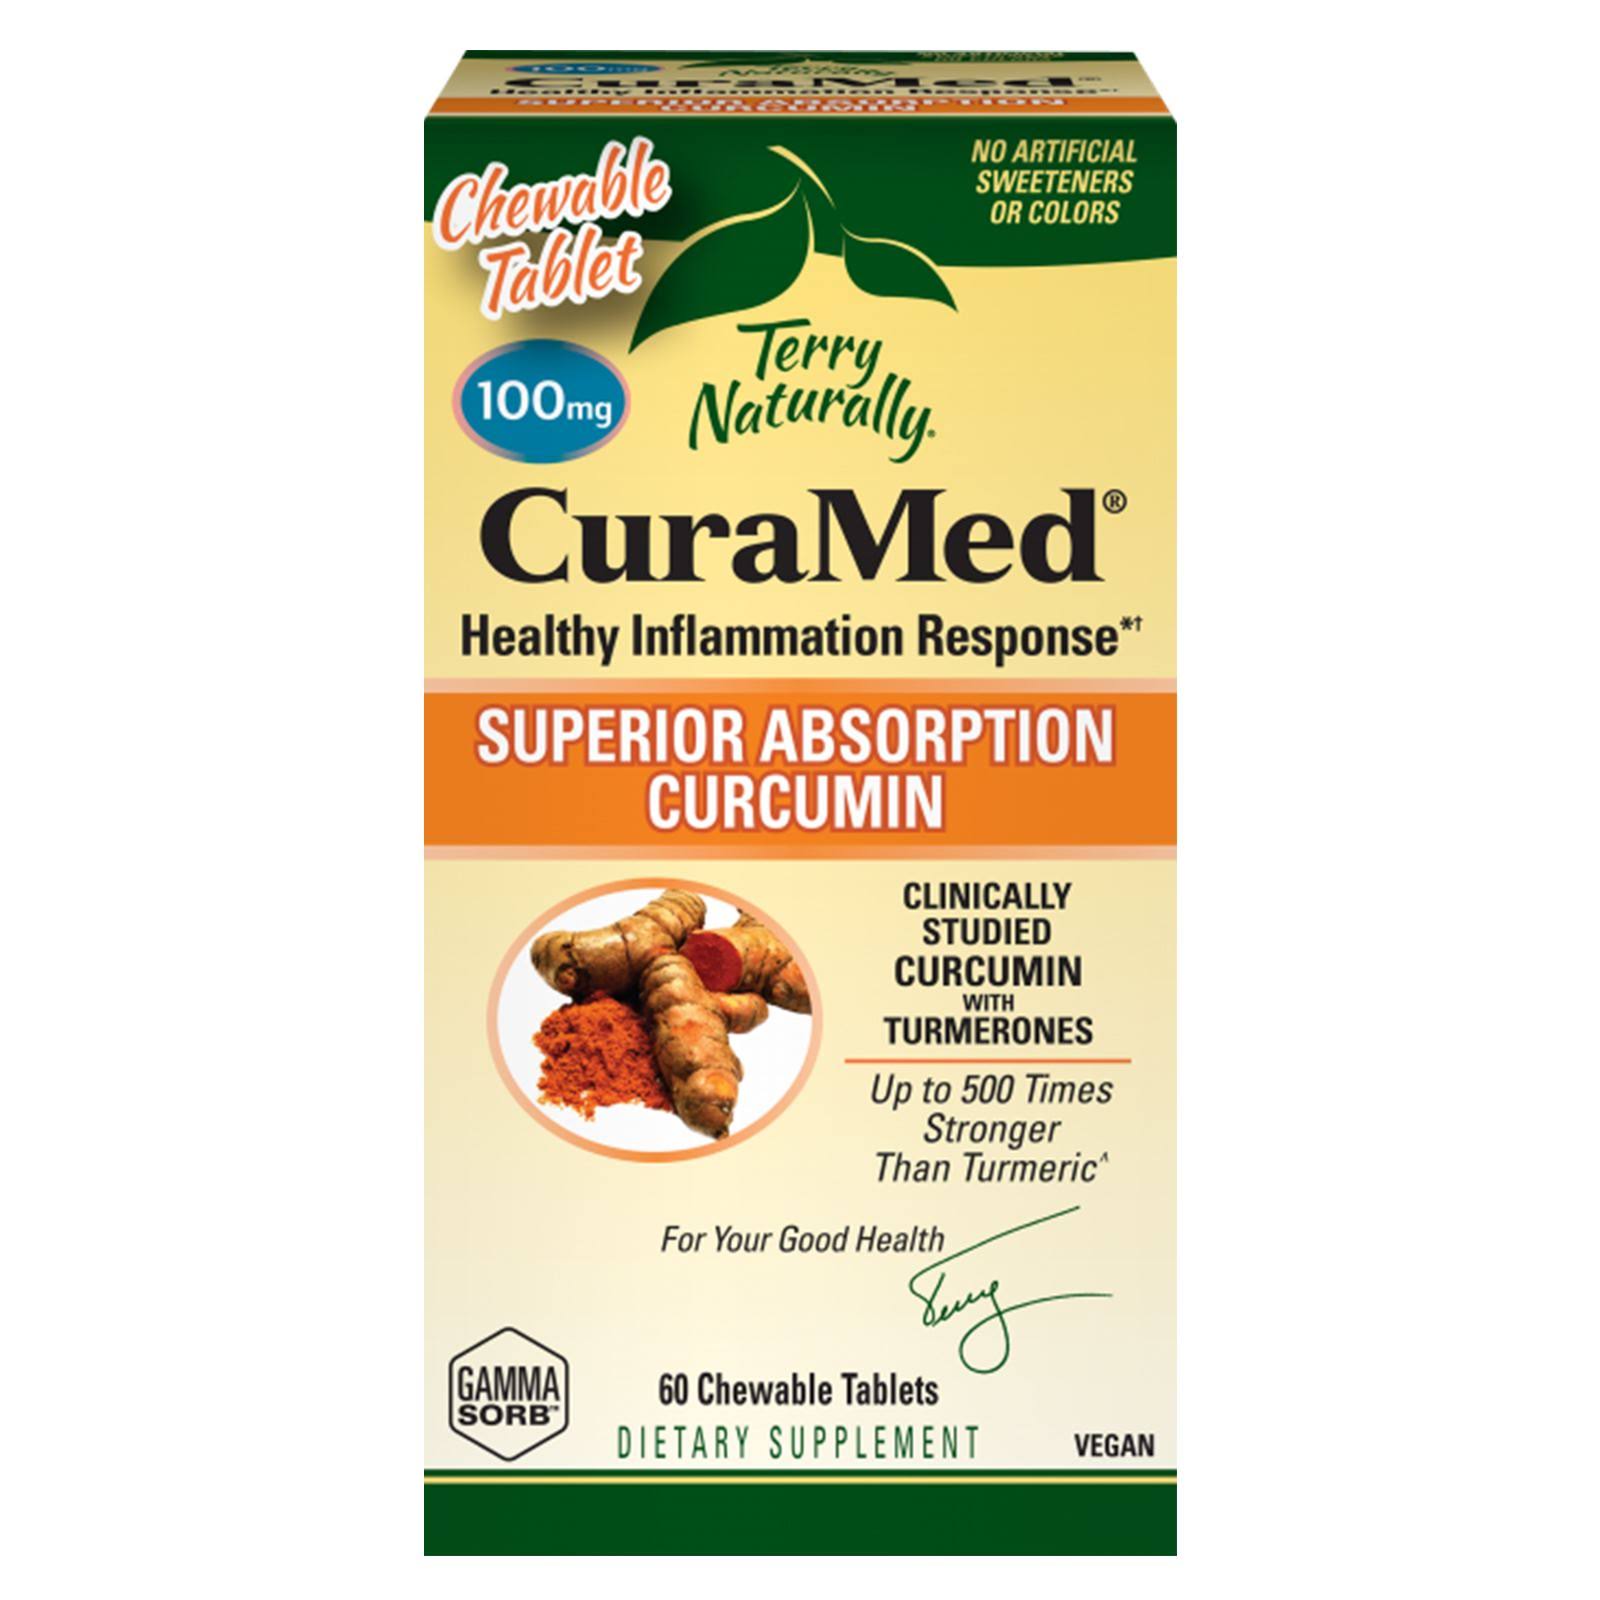 Terry Naturally CuraMed 100mg - 60 Chewable Tablets - Clinically Studi